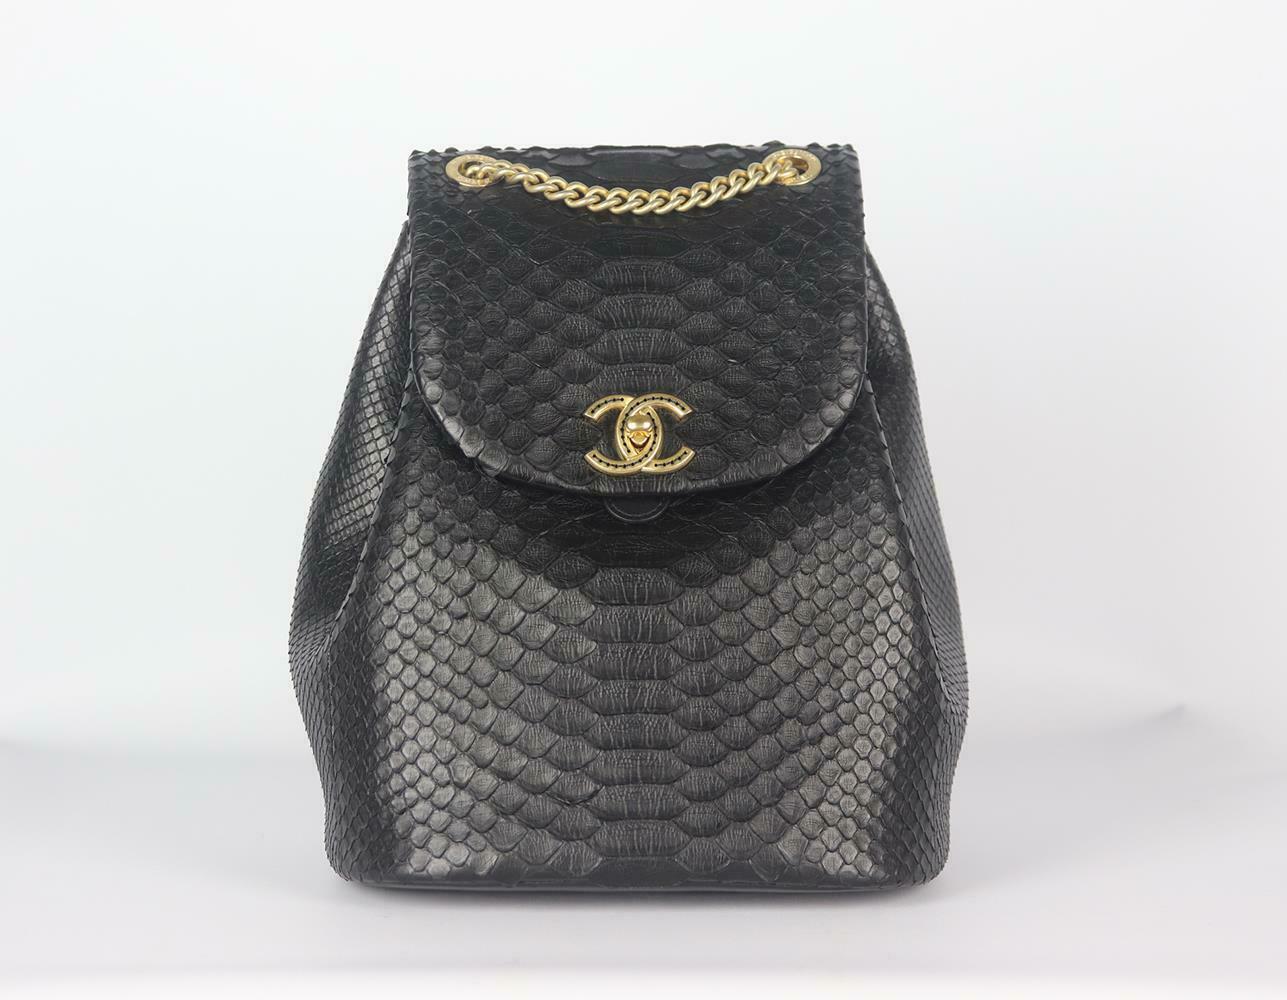 Made in Italy, this beautiful Chanel backpack has been made from black python and leather exterior with black leather interior, this piece is decorated with Chanel's antiqued-gold embroidered twist-lock logo on the front and finished chain top hand